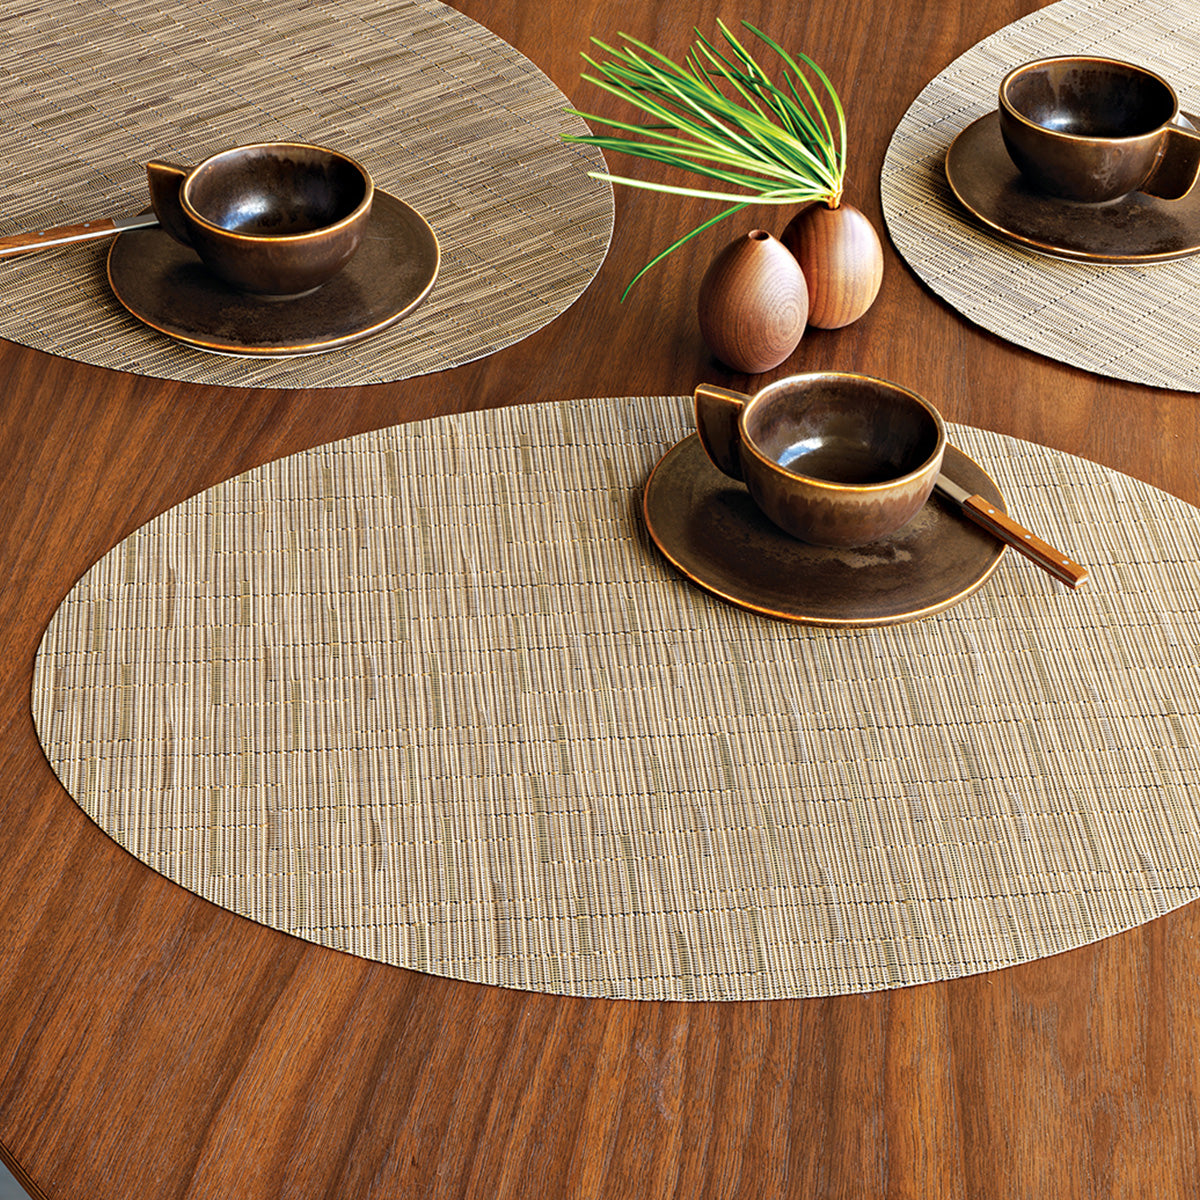 Chilewich Placemat - Bamboo - Camel